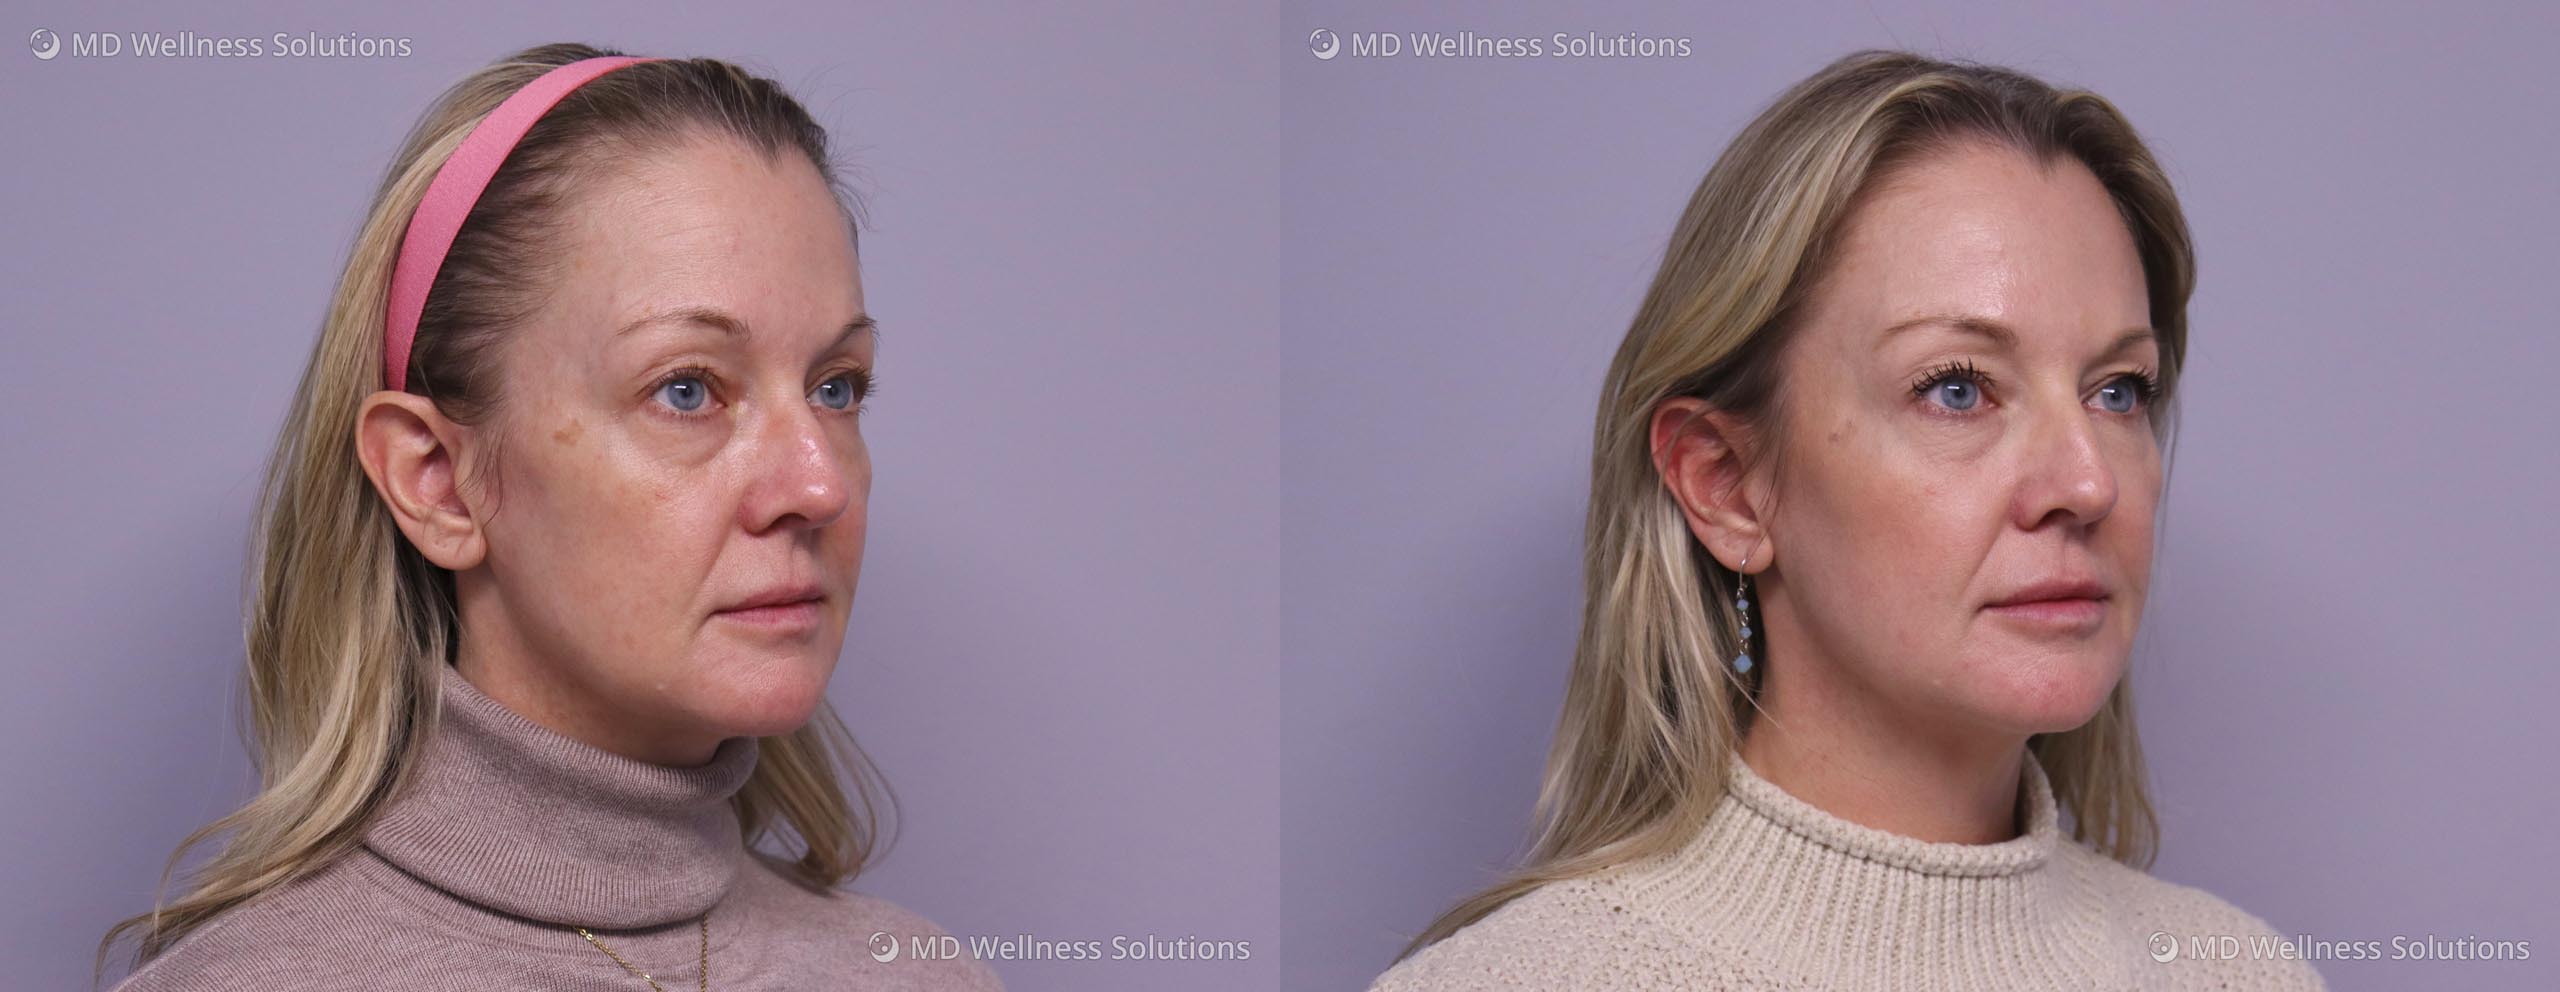 35-44 year old woman before and after Potenza microneedling treatment